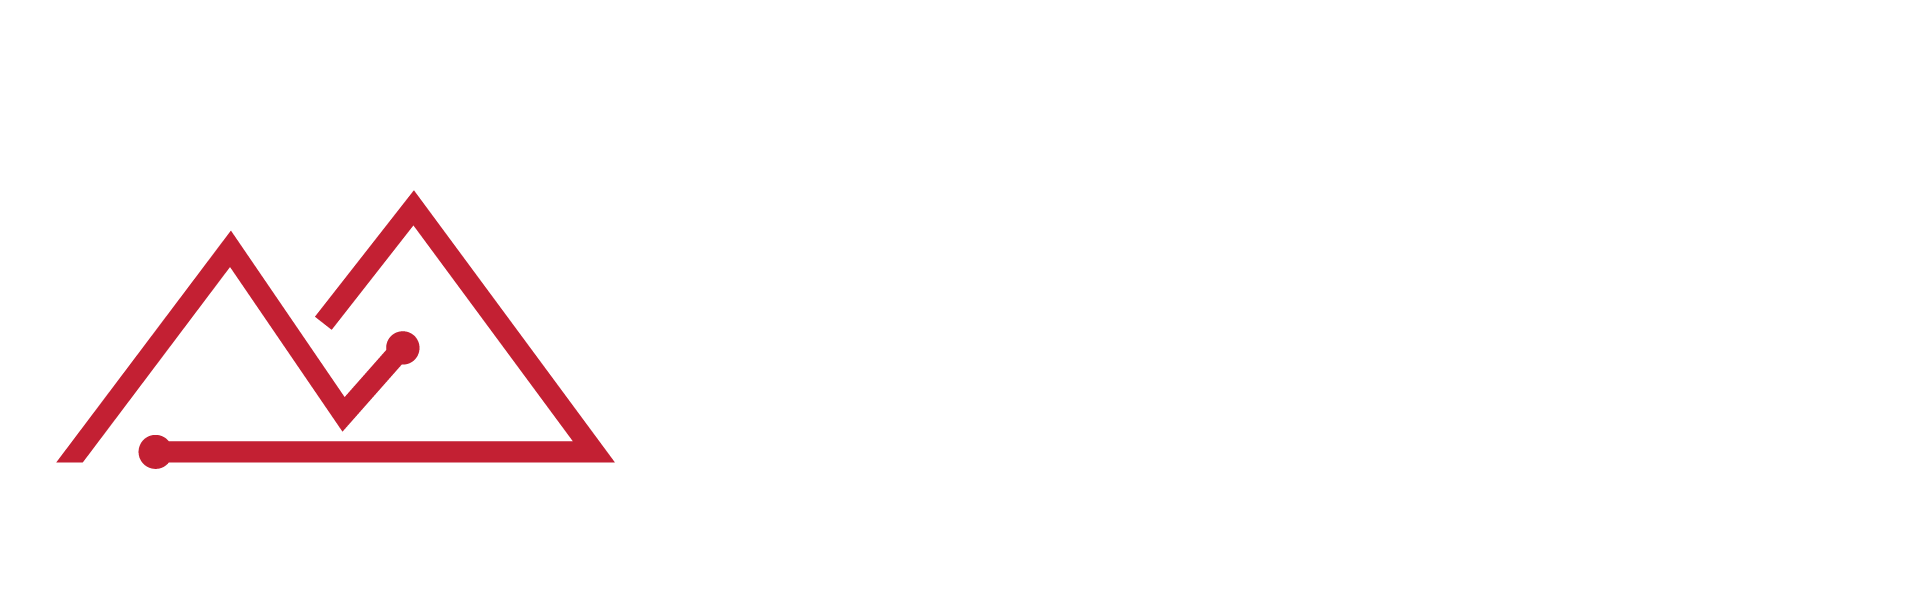 Bintel_Logo_Linear_Red and White_72.png